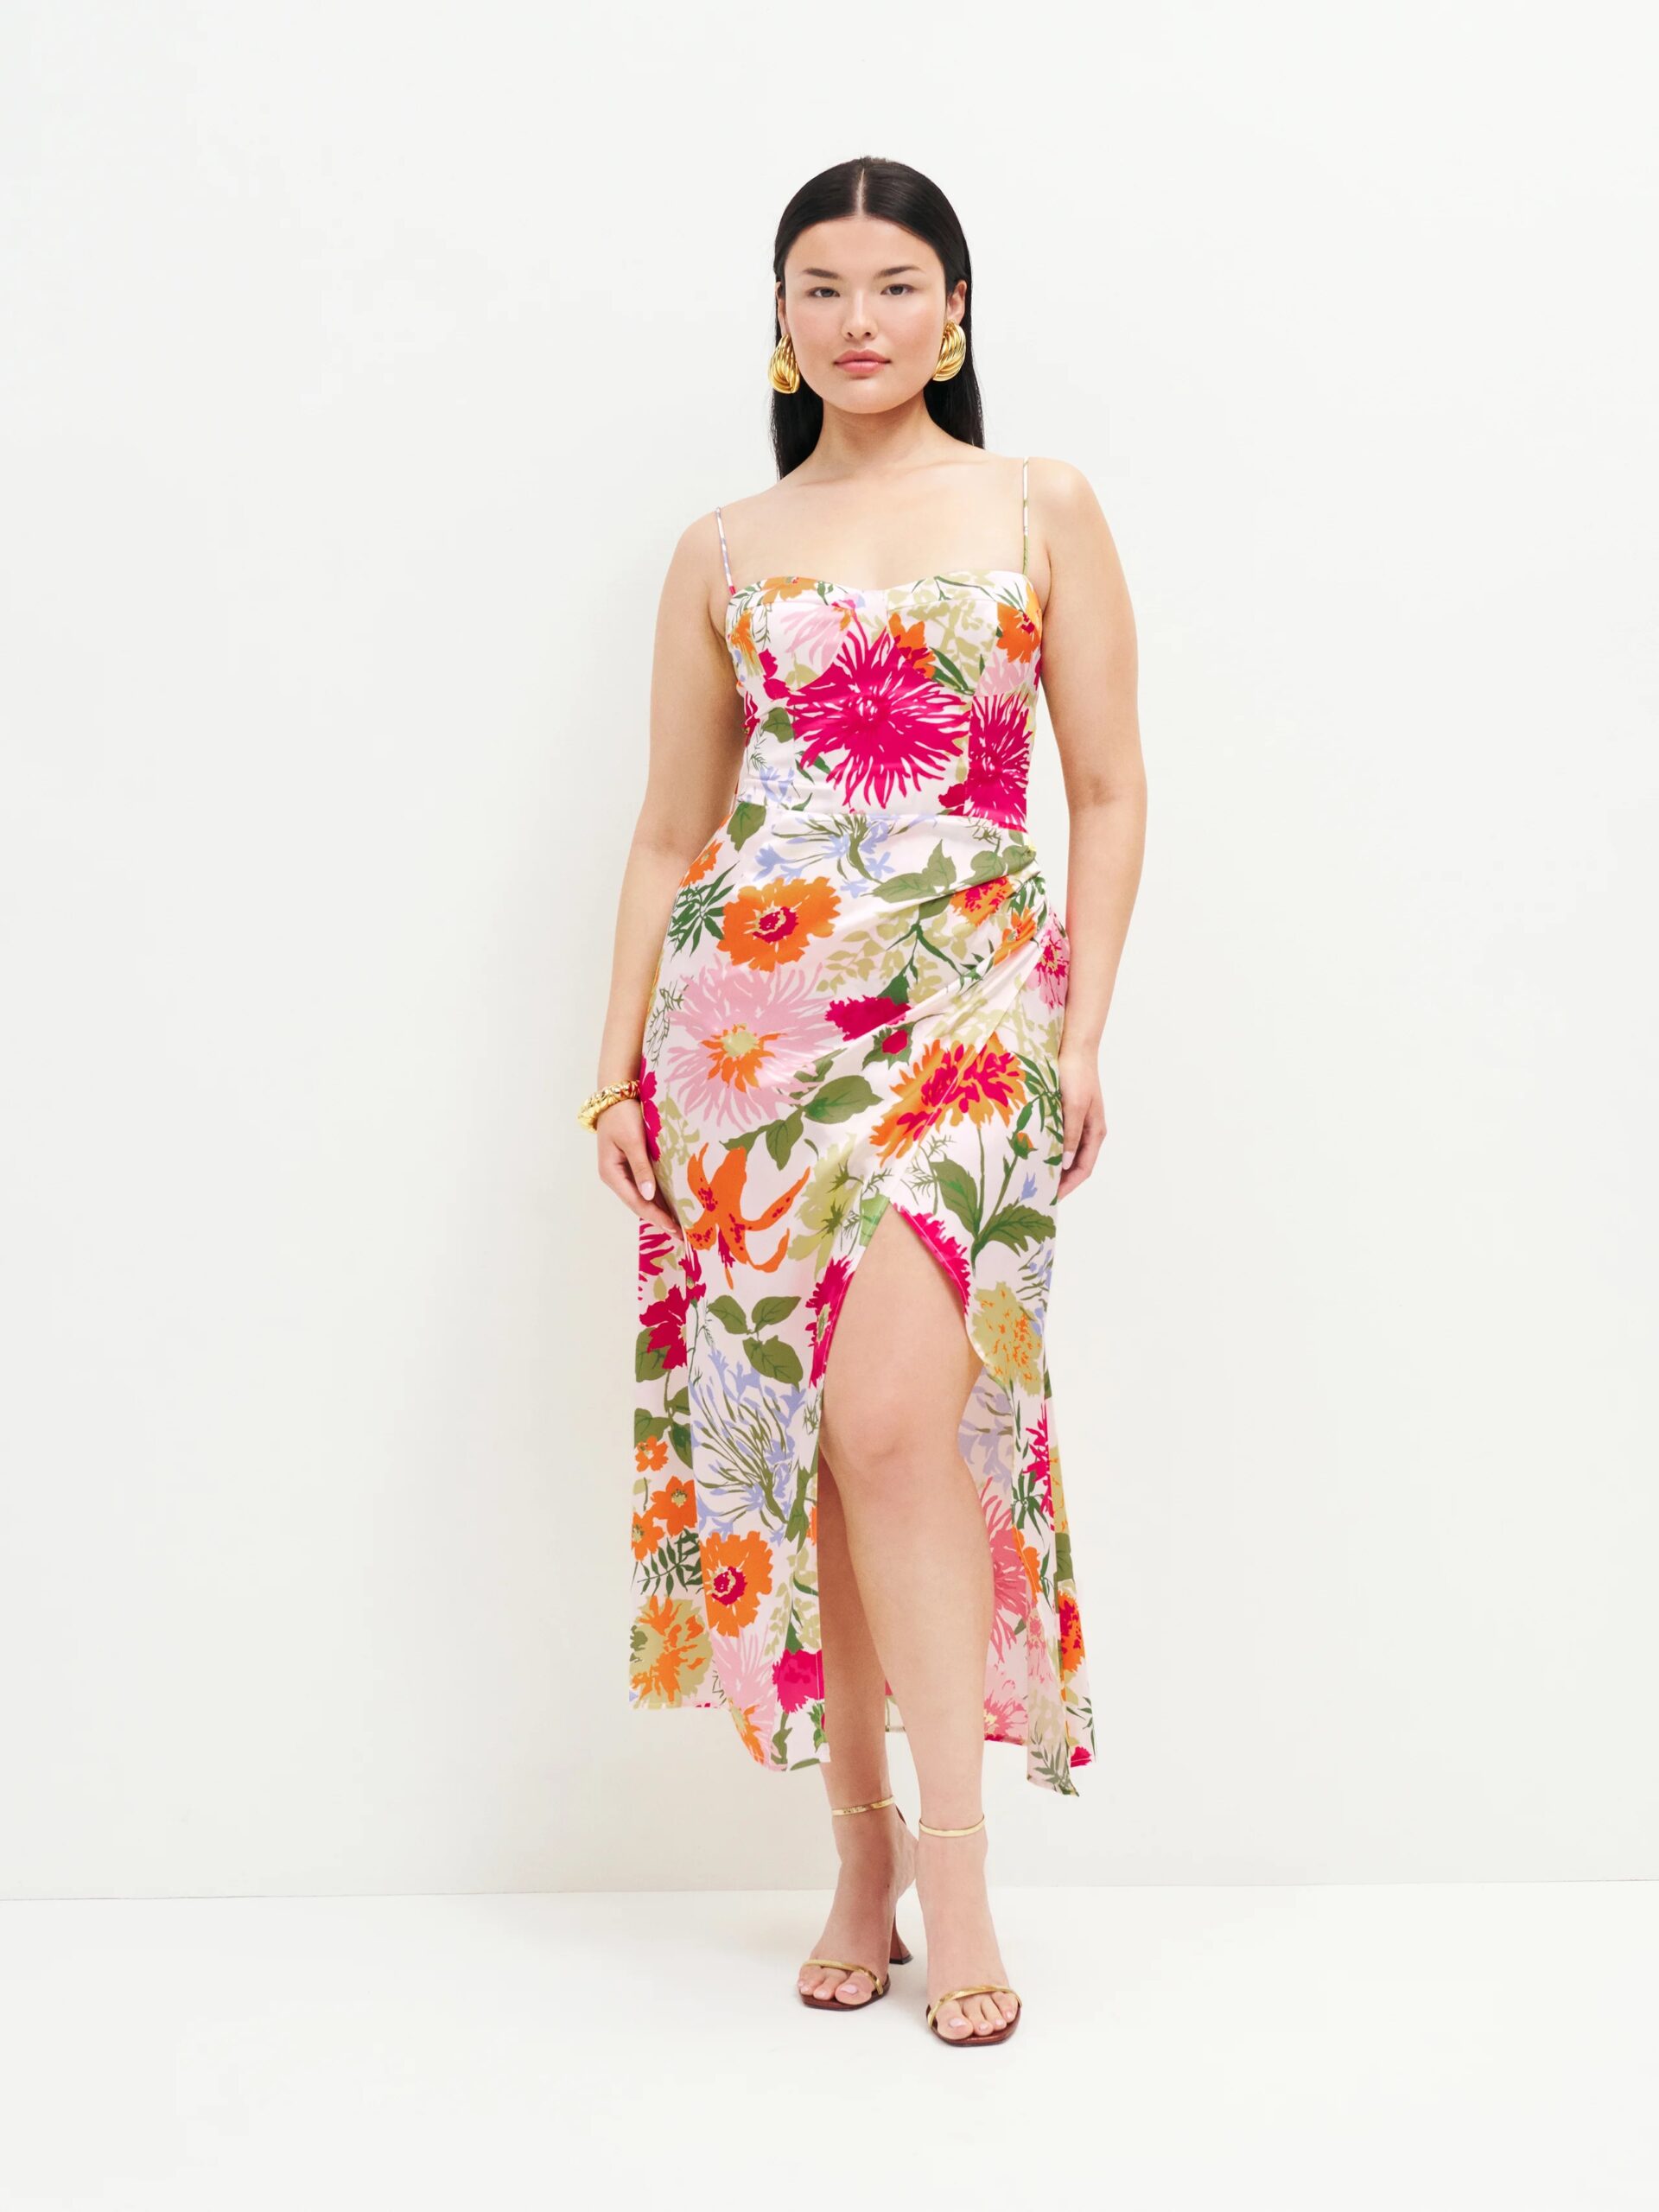 A model wears a floral spaghetti strap dress with a gathered waist and thigh slit.